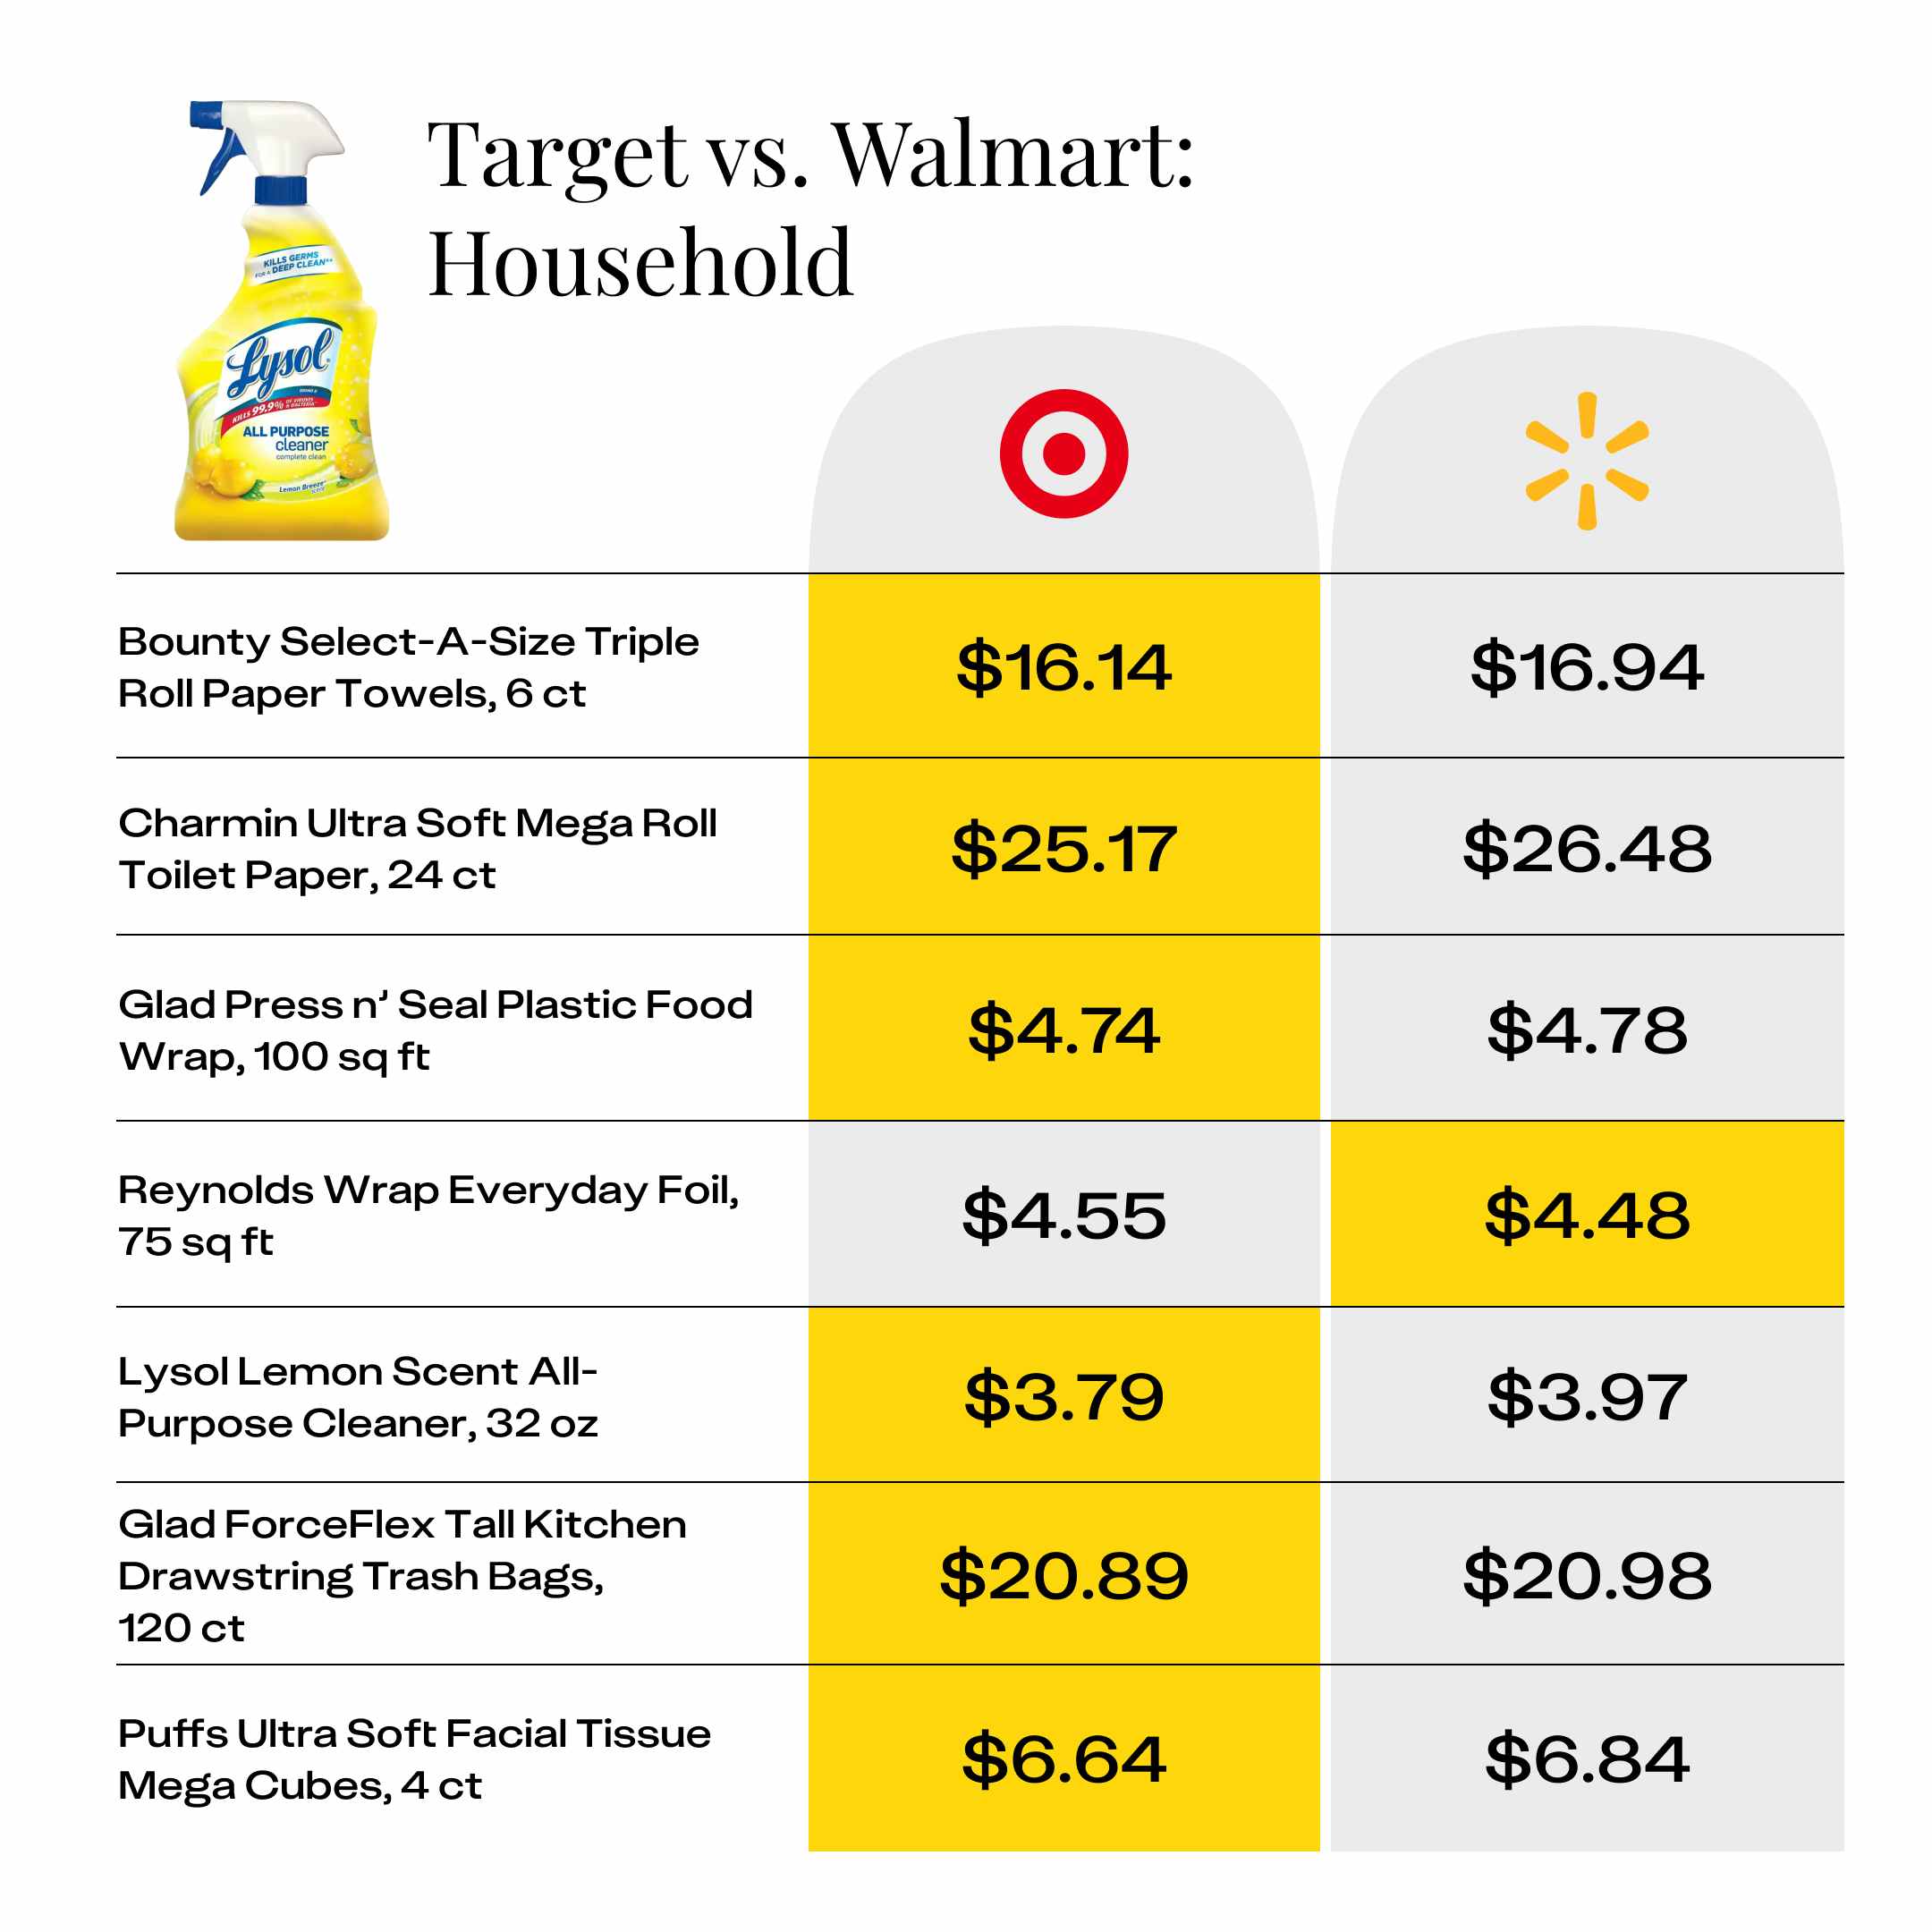 price comparison for household products at Target and Walmart